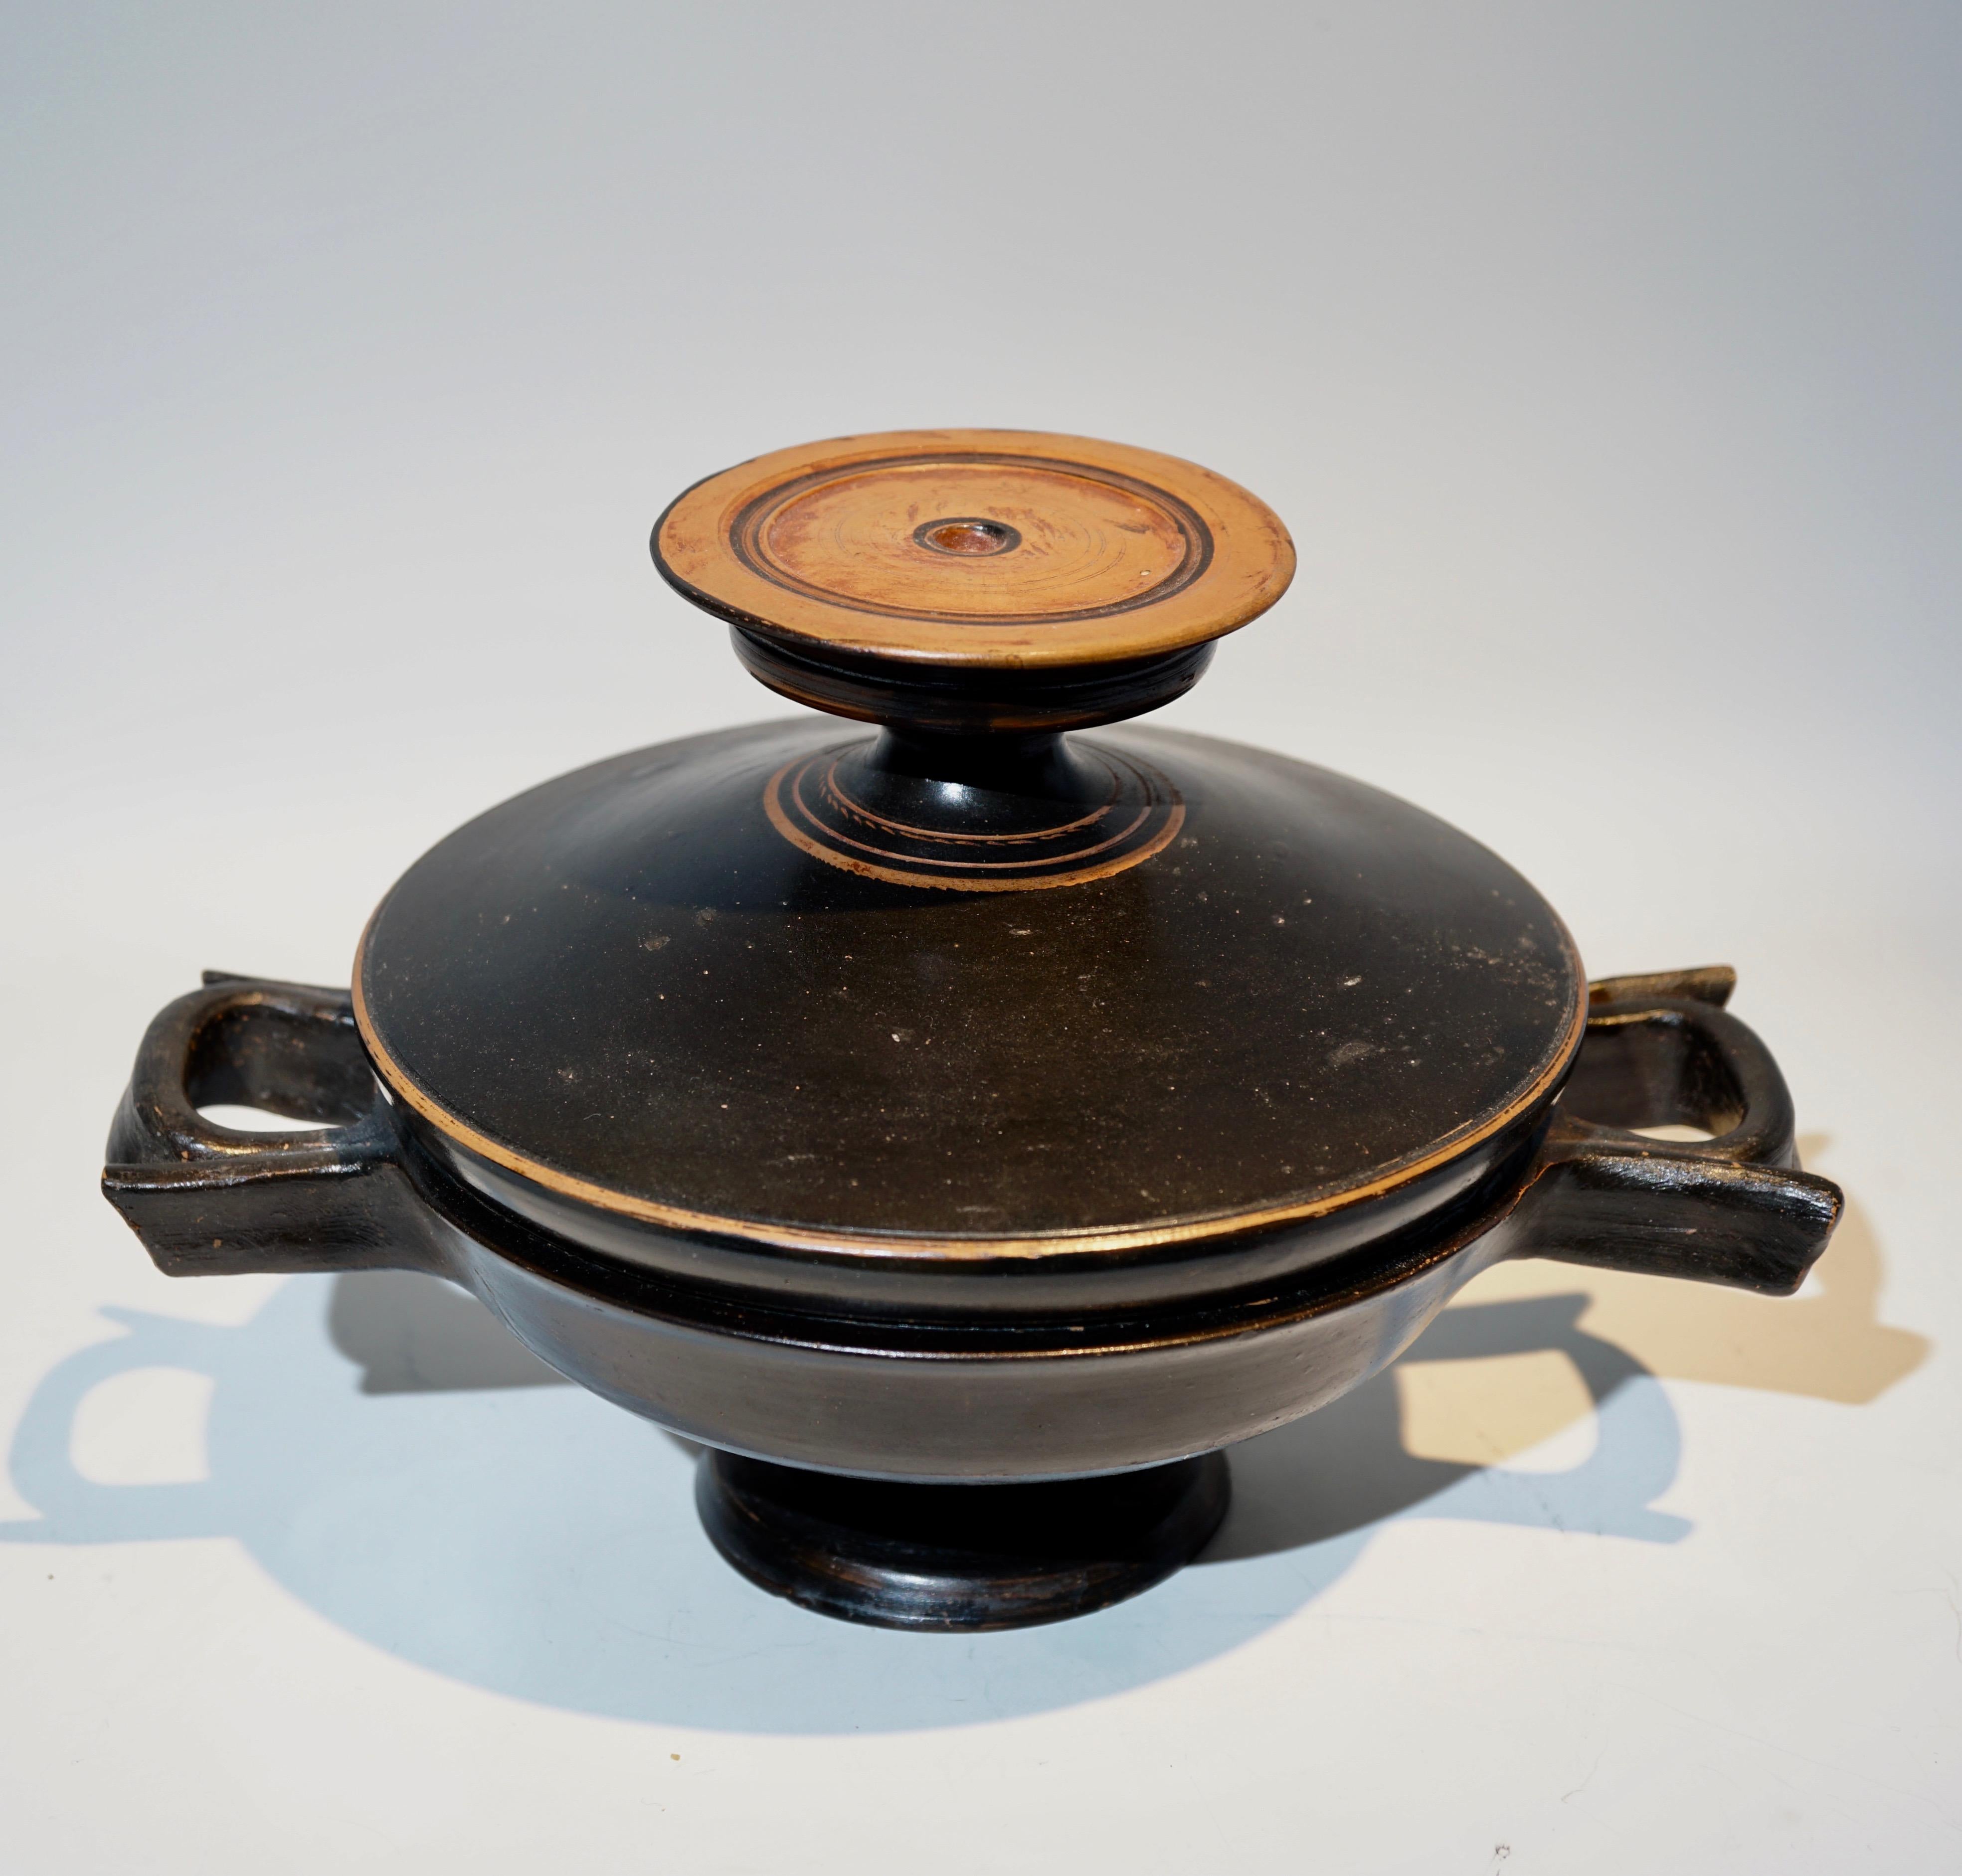 Attic sizeable black glazed lidded lekanis with ribbon-like handles projecting from the sides, resting on a broad foot. The lid is topped with a large disc-like knob with slightly raised edges that is sitting on a short stem. The lid is decorated